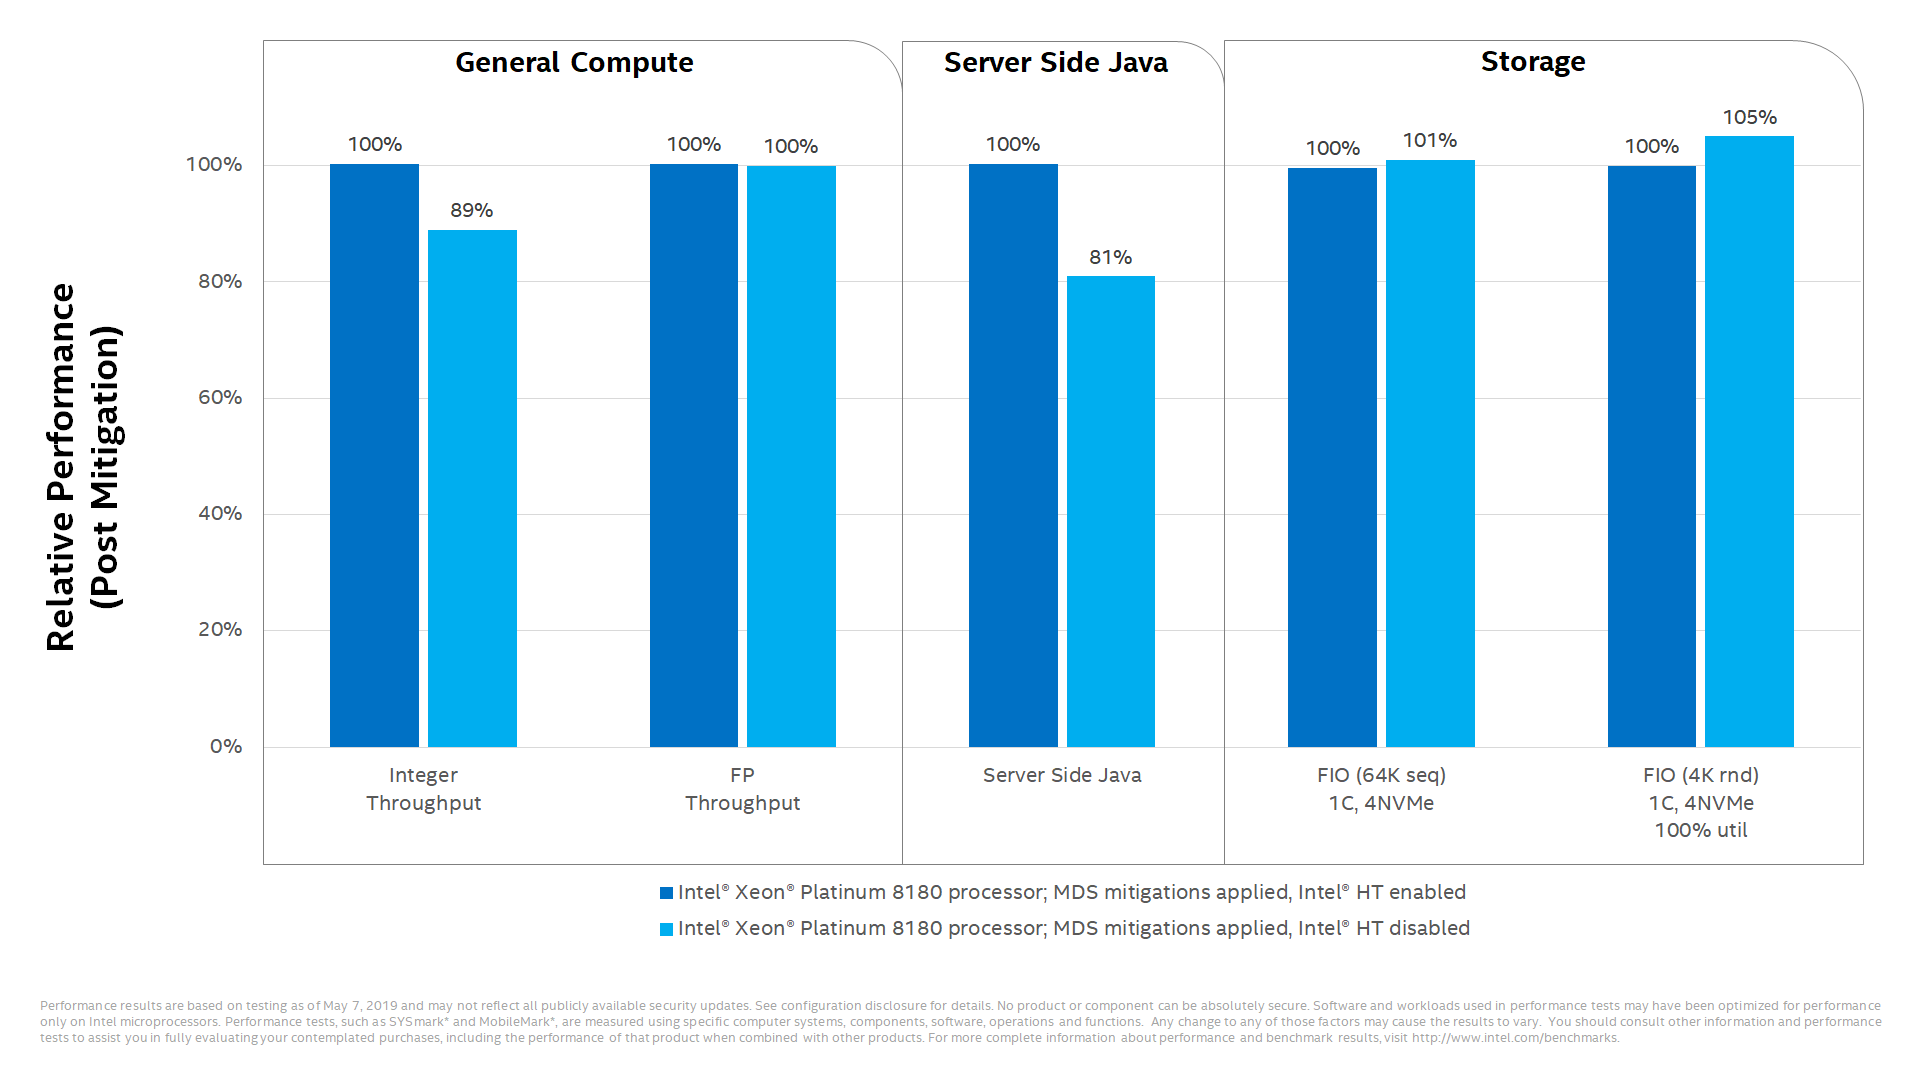 Some performance impact to select data center workloads with Intel® HT disabled